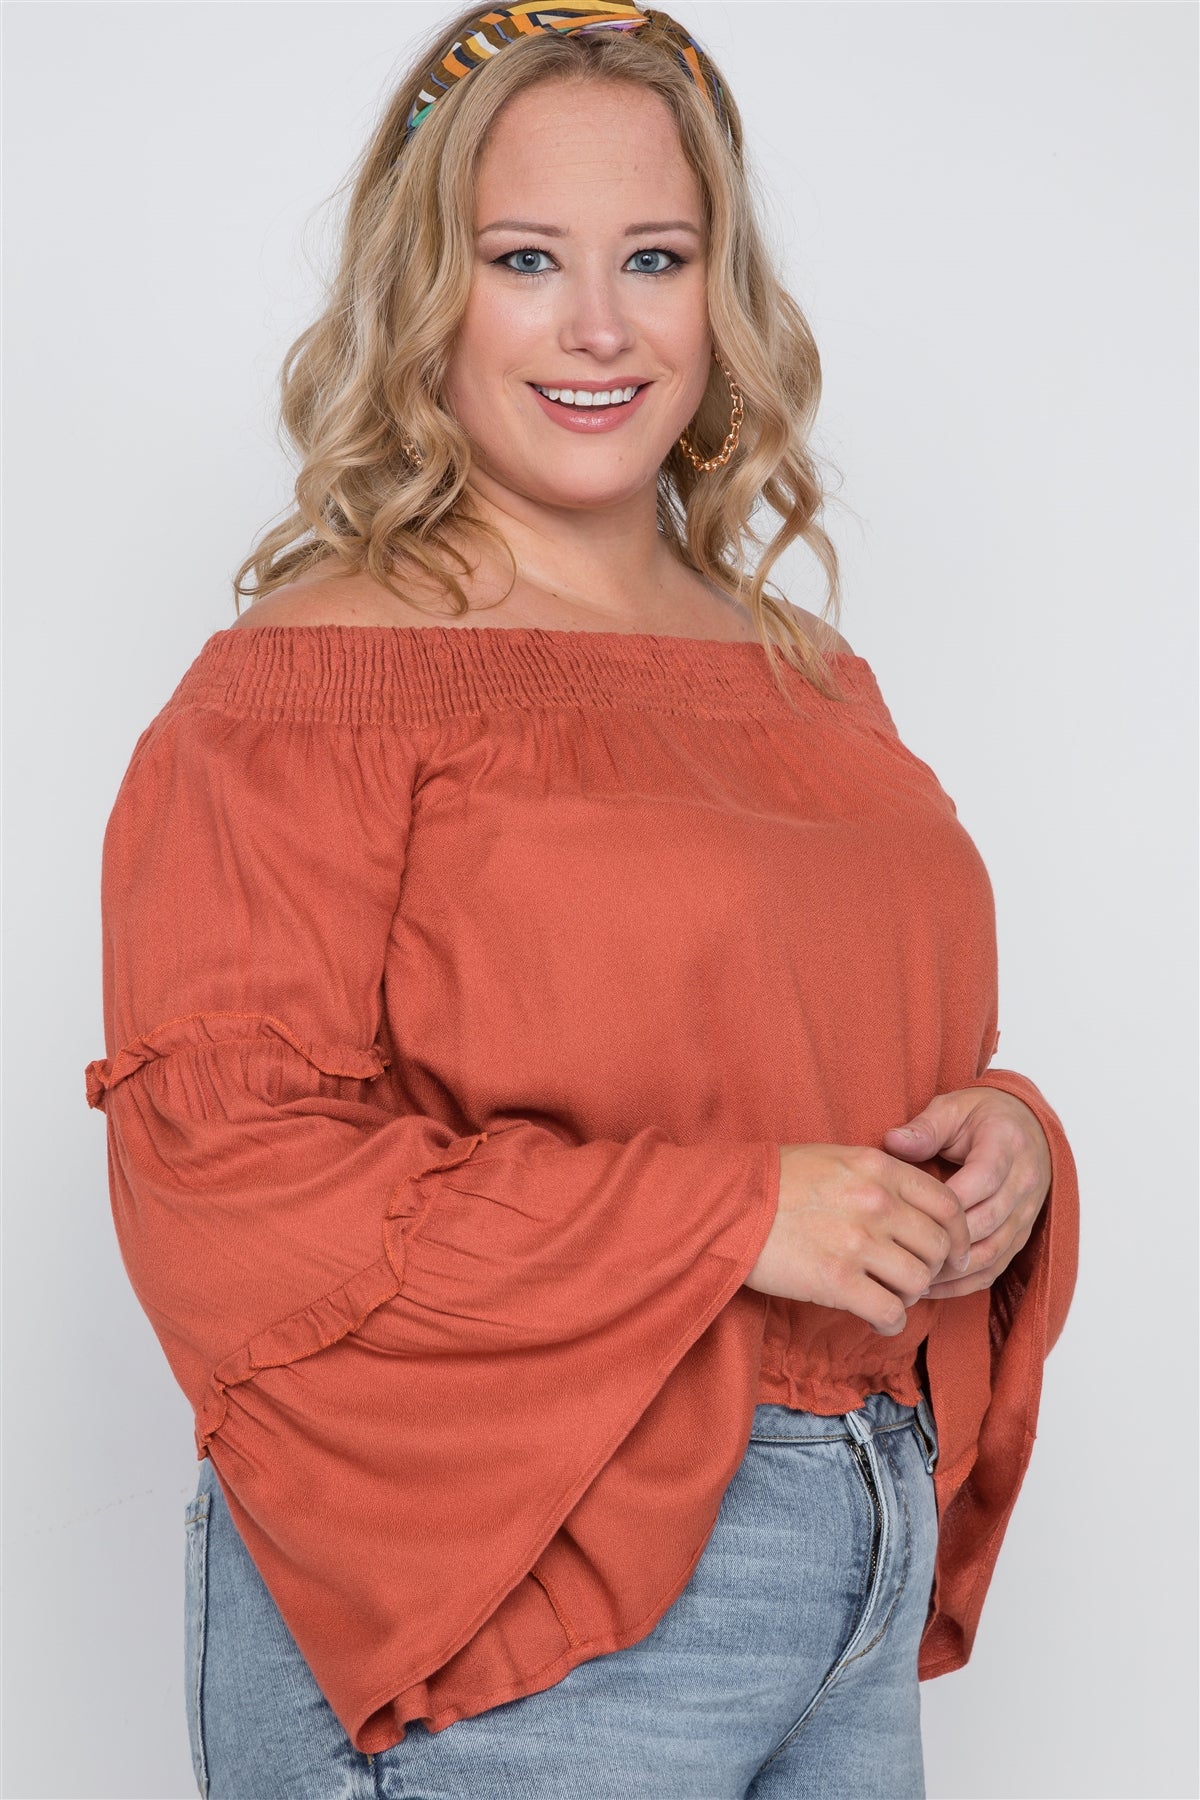 Plus Size Off-the-shoulders Bell Sleeve Top